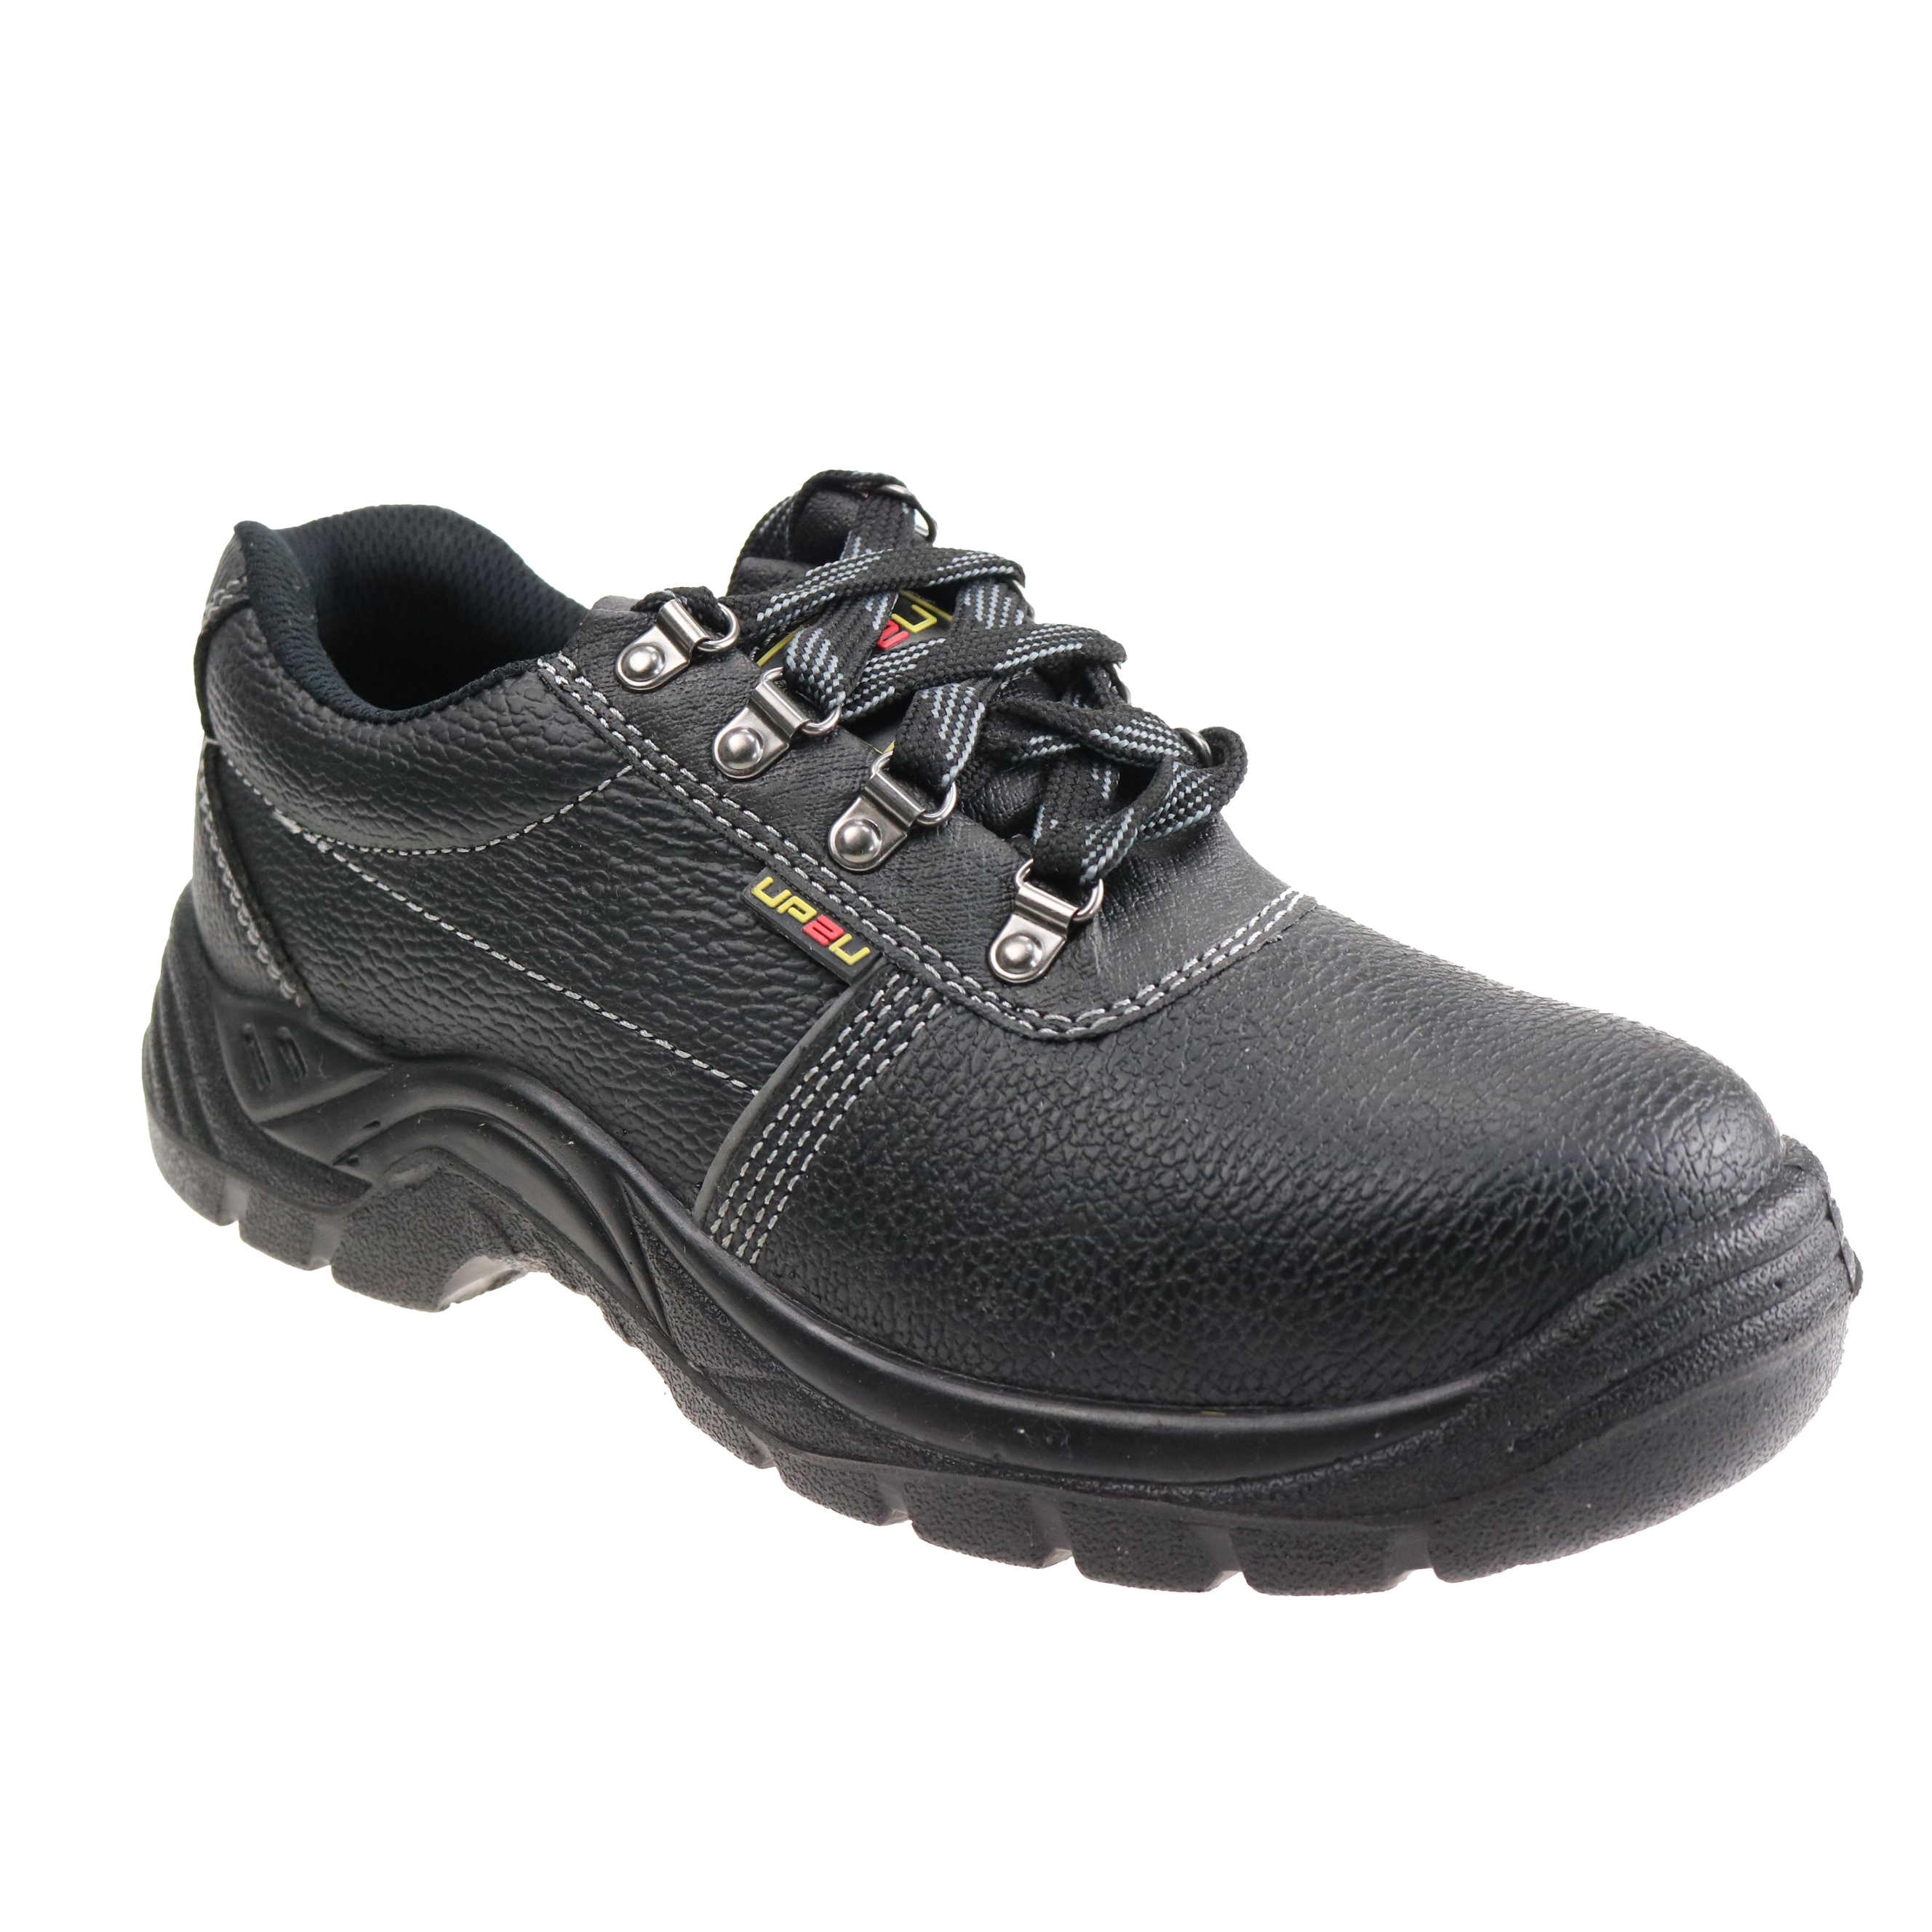 The Most Basic  Work Industrial Safety Shoes For Men